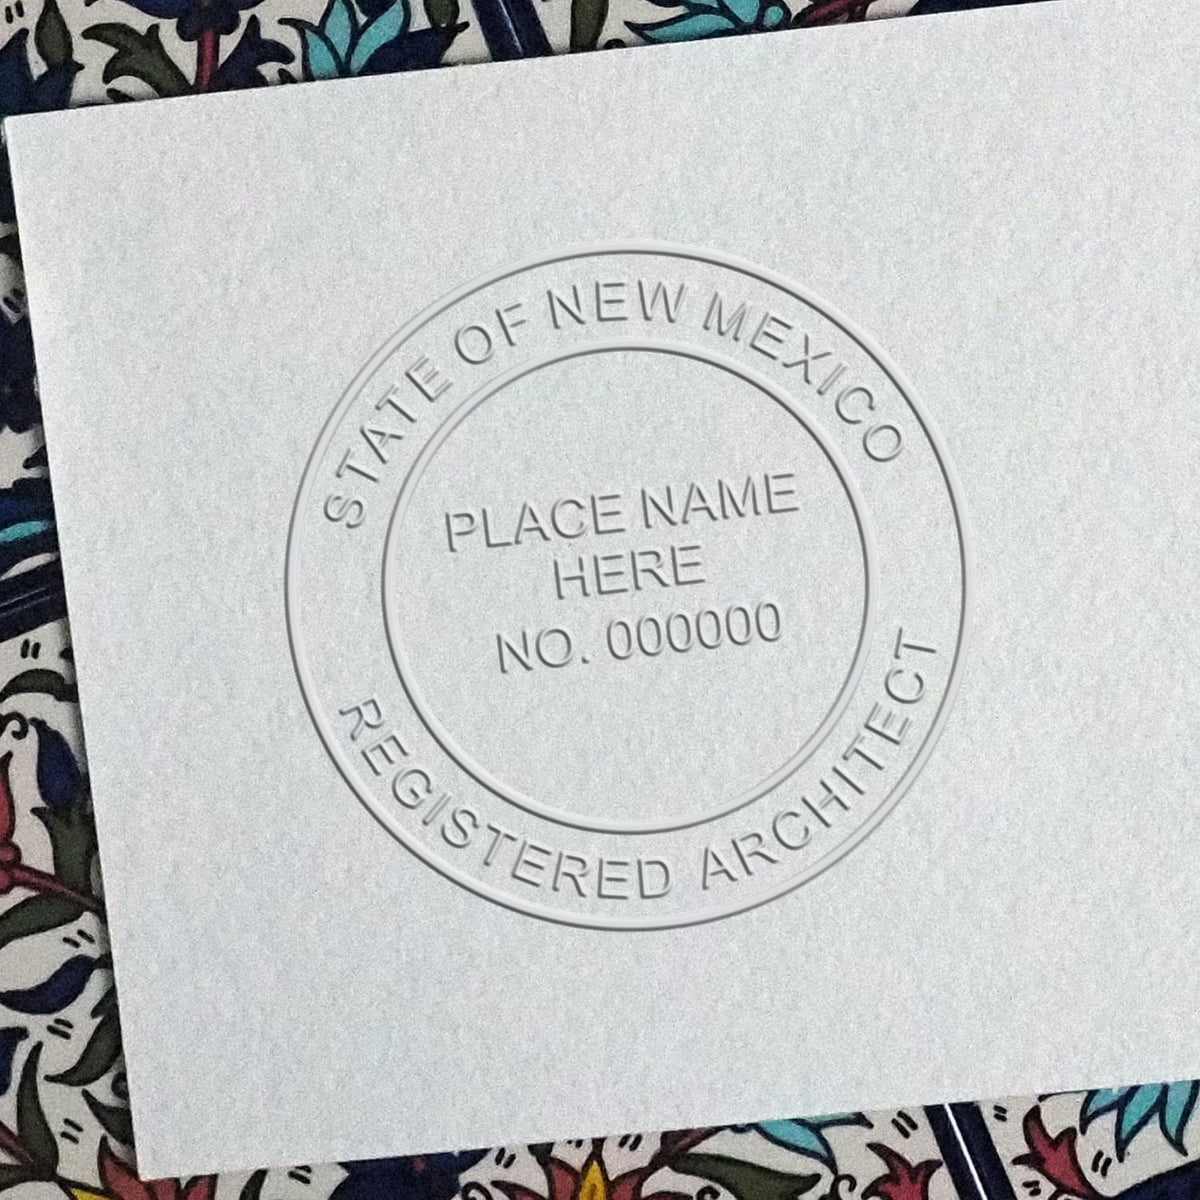 An in use photo of the Hybrid New Mexico Architect Seal showing a sample imprint on a cardstock